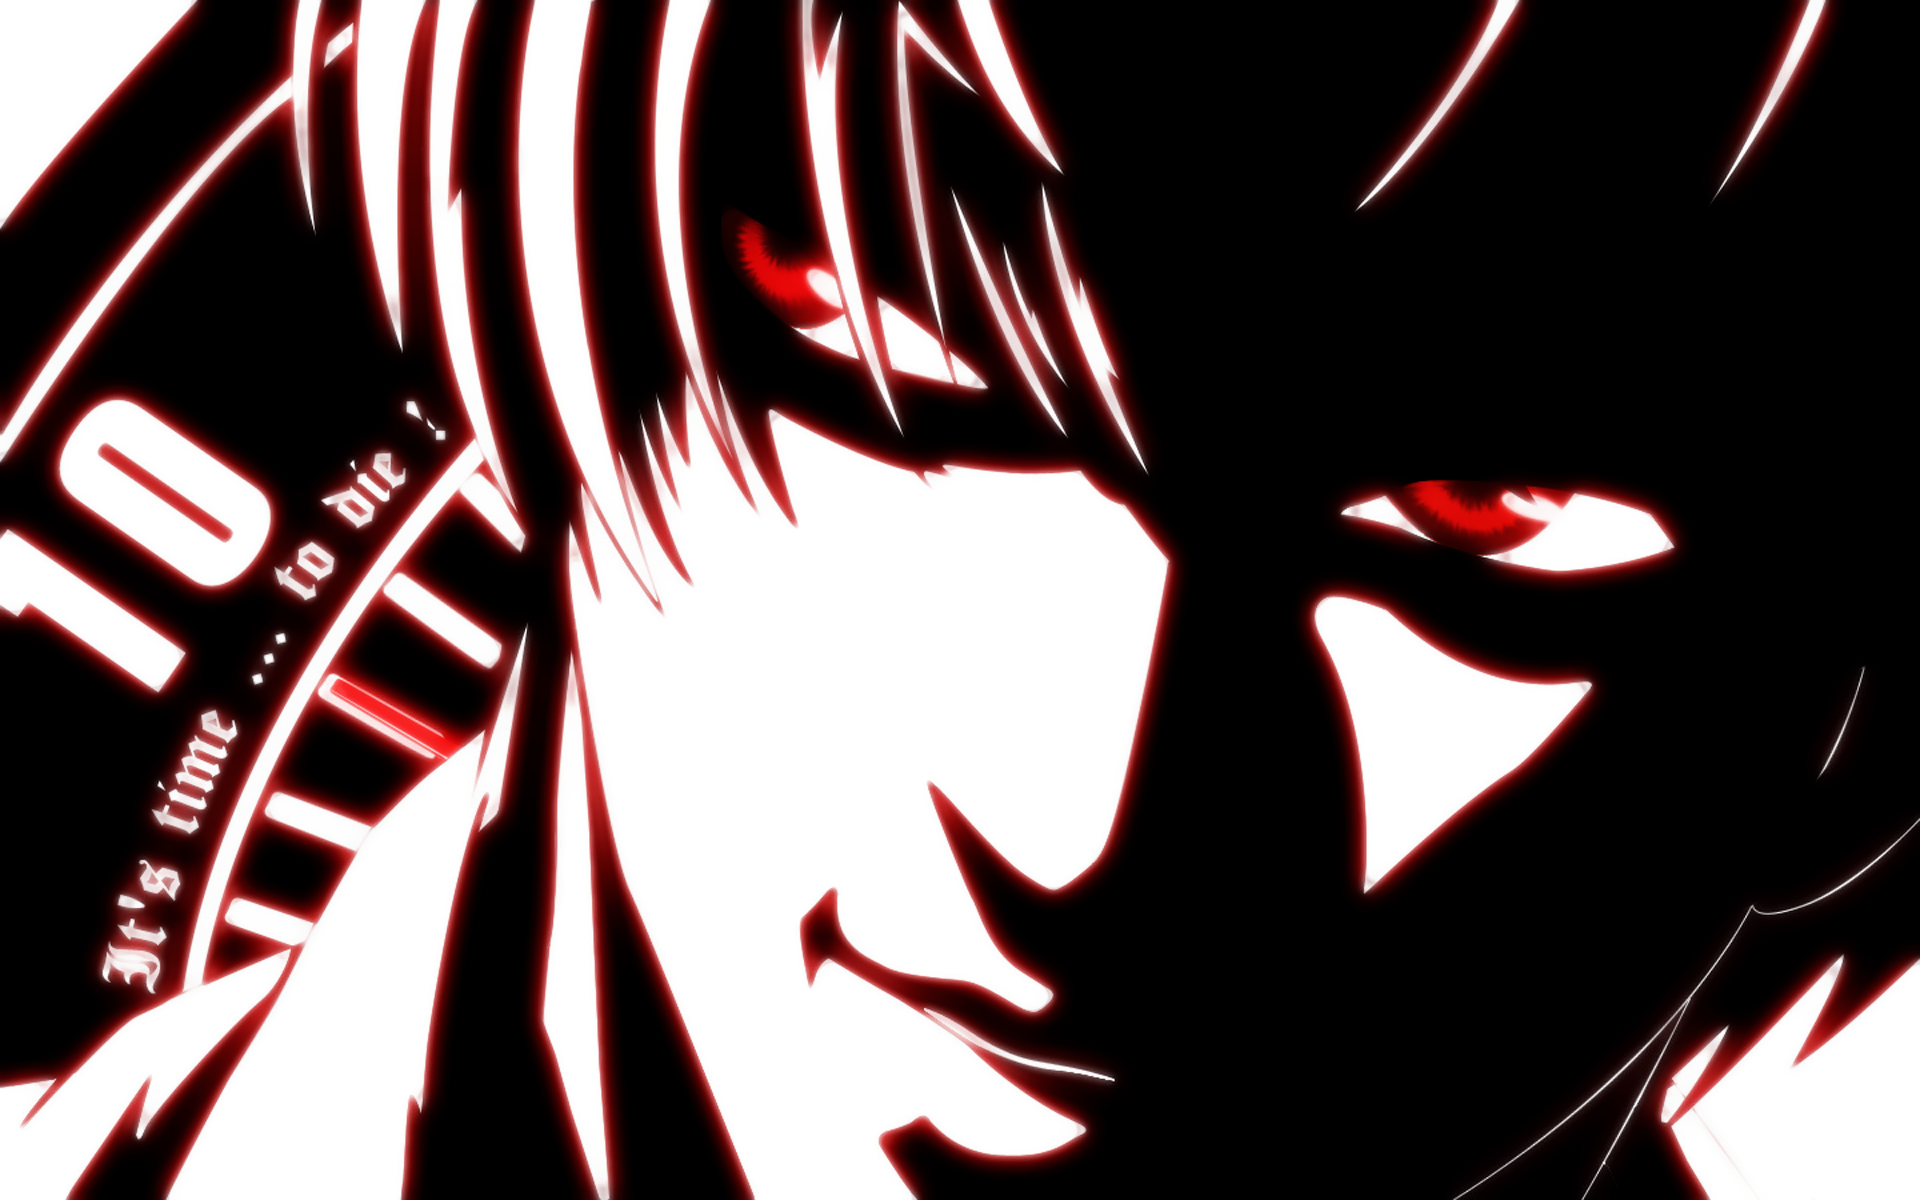 Light Yagami from Death Note: Intense, intelligent anime character with a dark and mysterious aura.